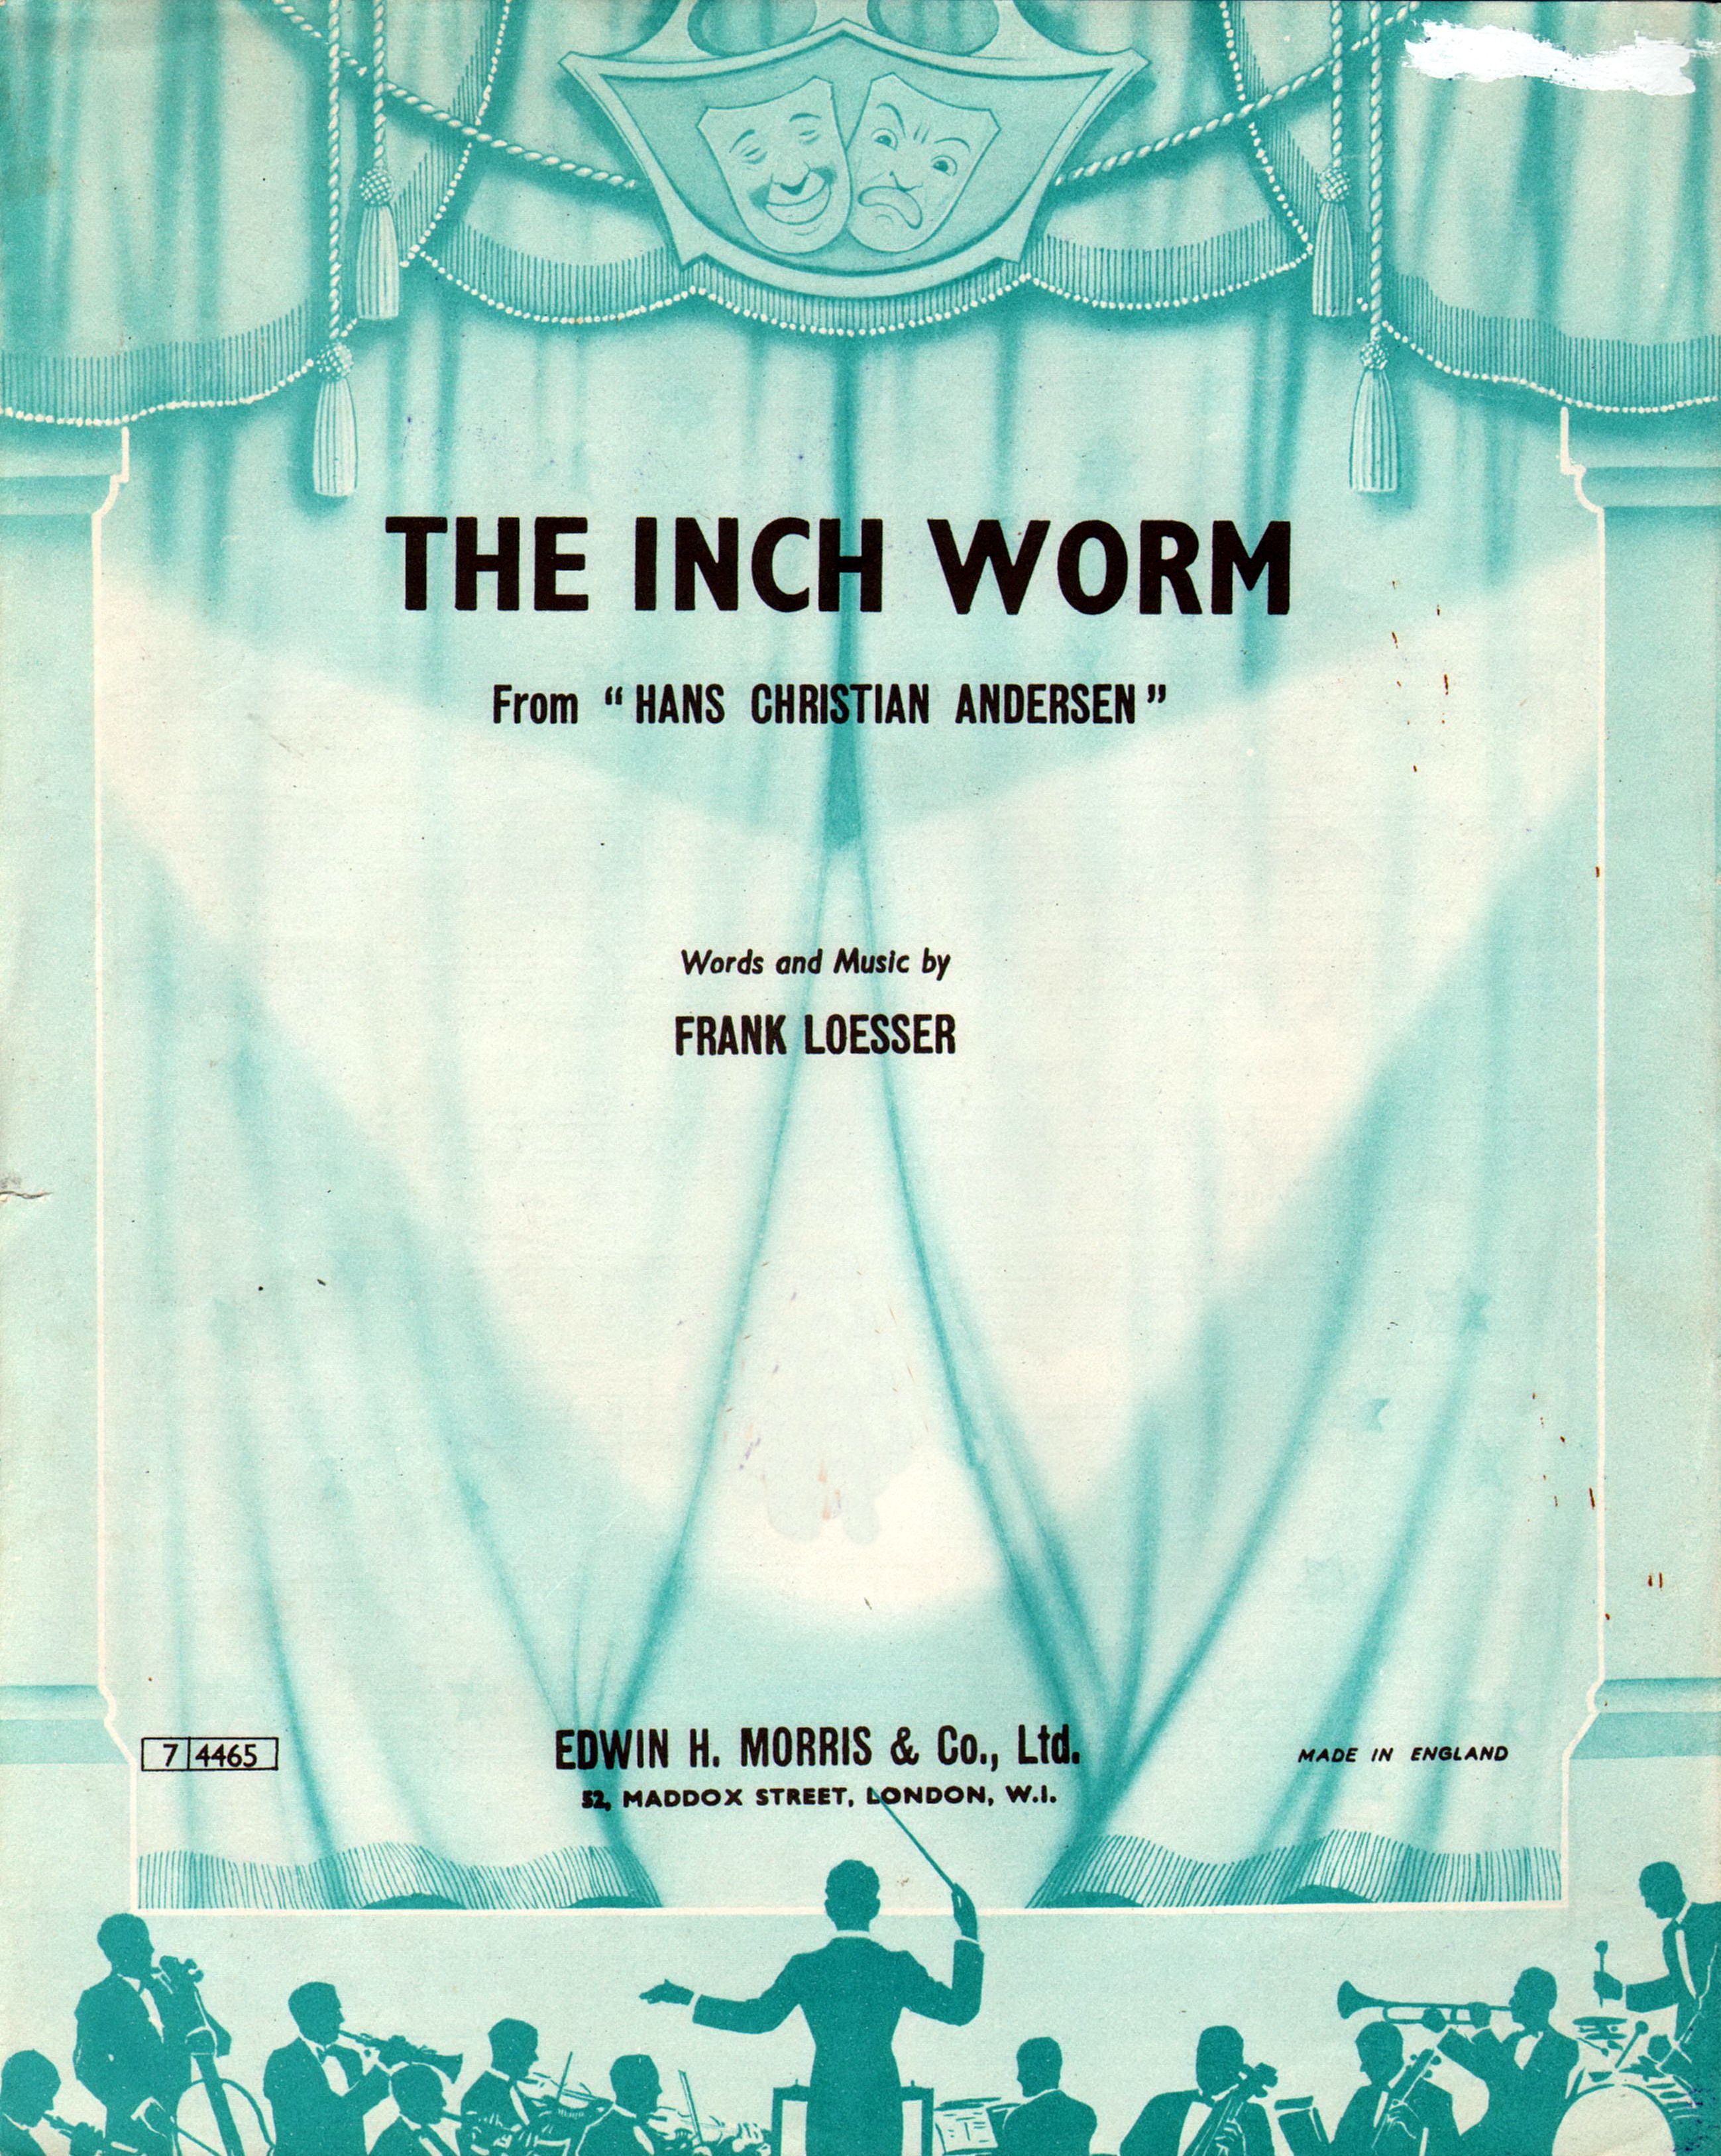 The Inch Worm from Hans Christian Anderson